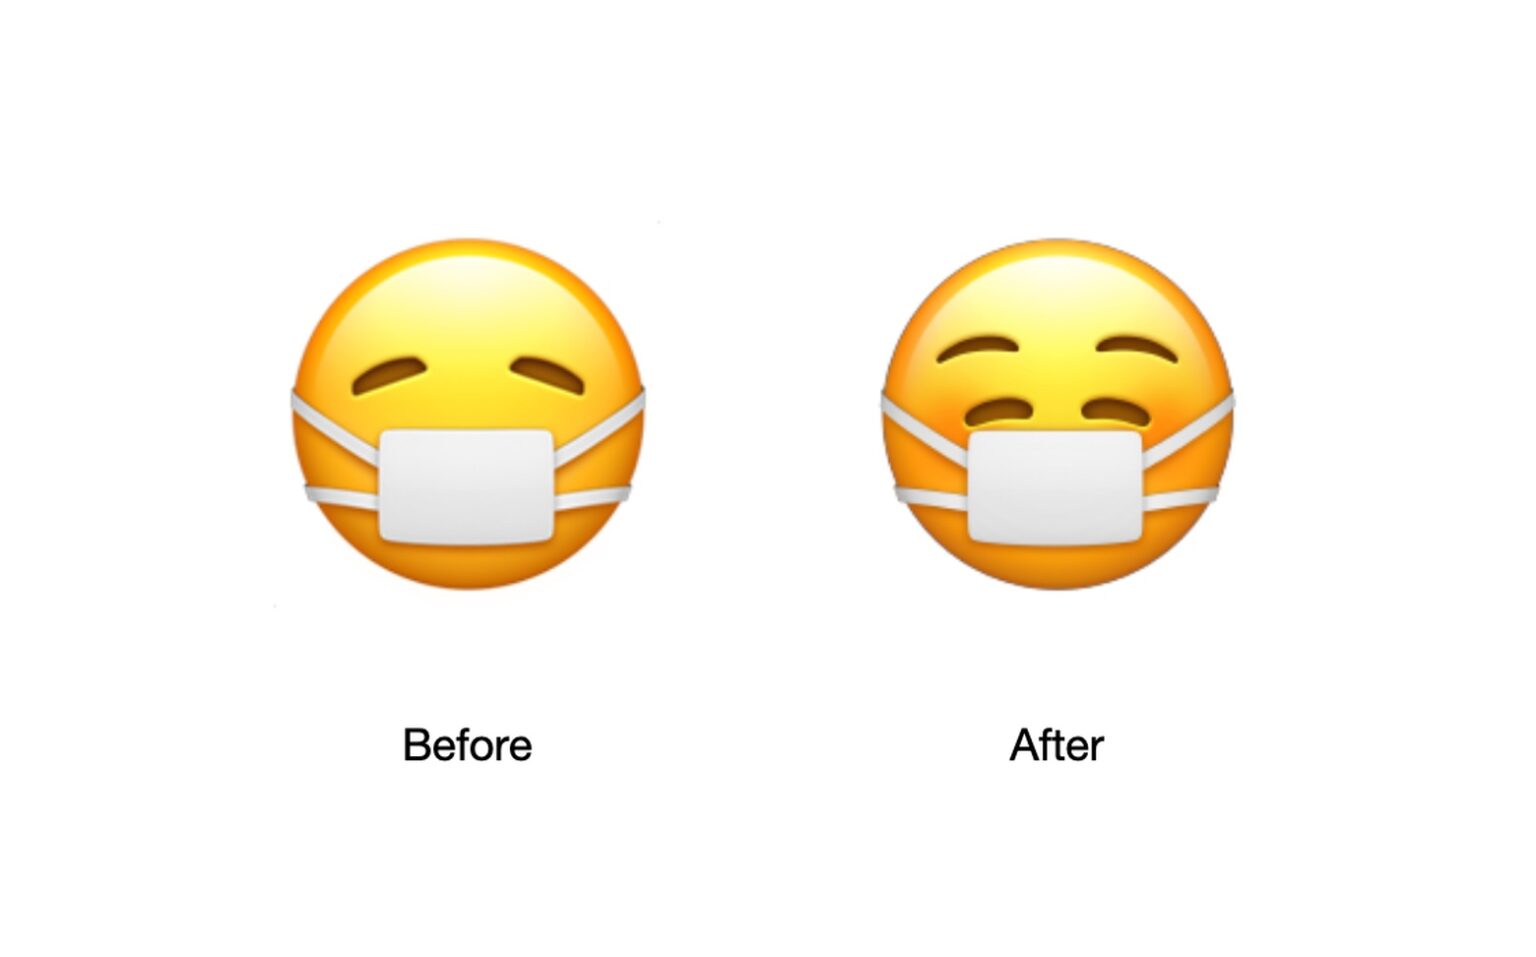 The mask-wearing emoji has a smile on its face. Apparently